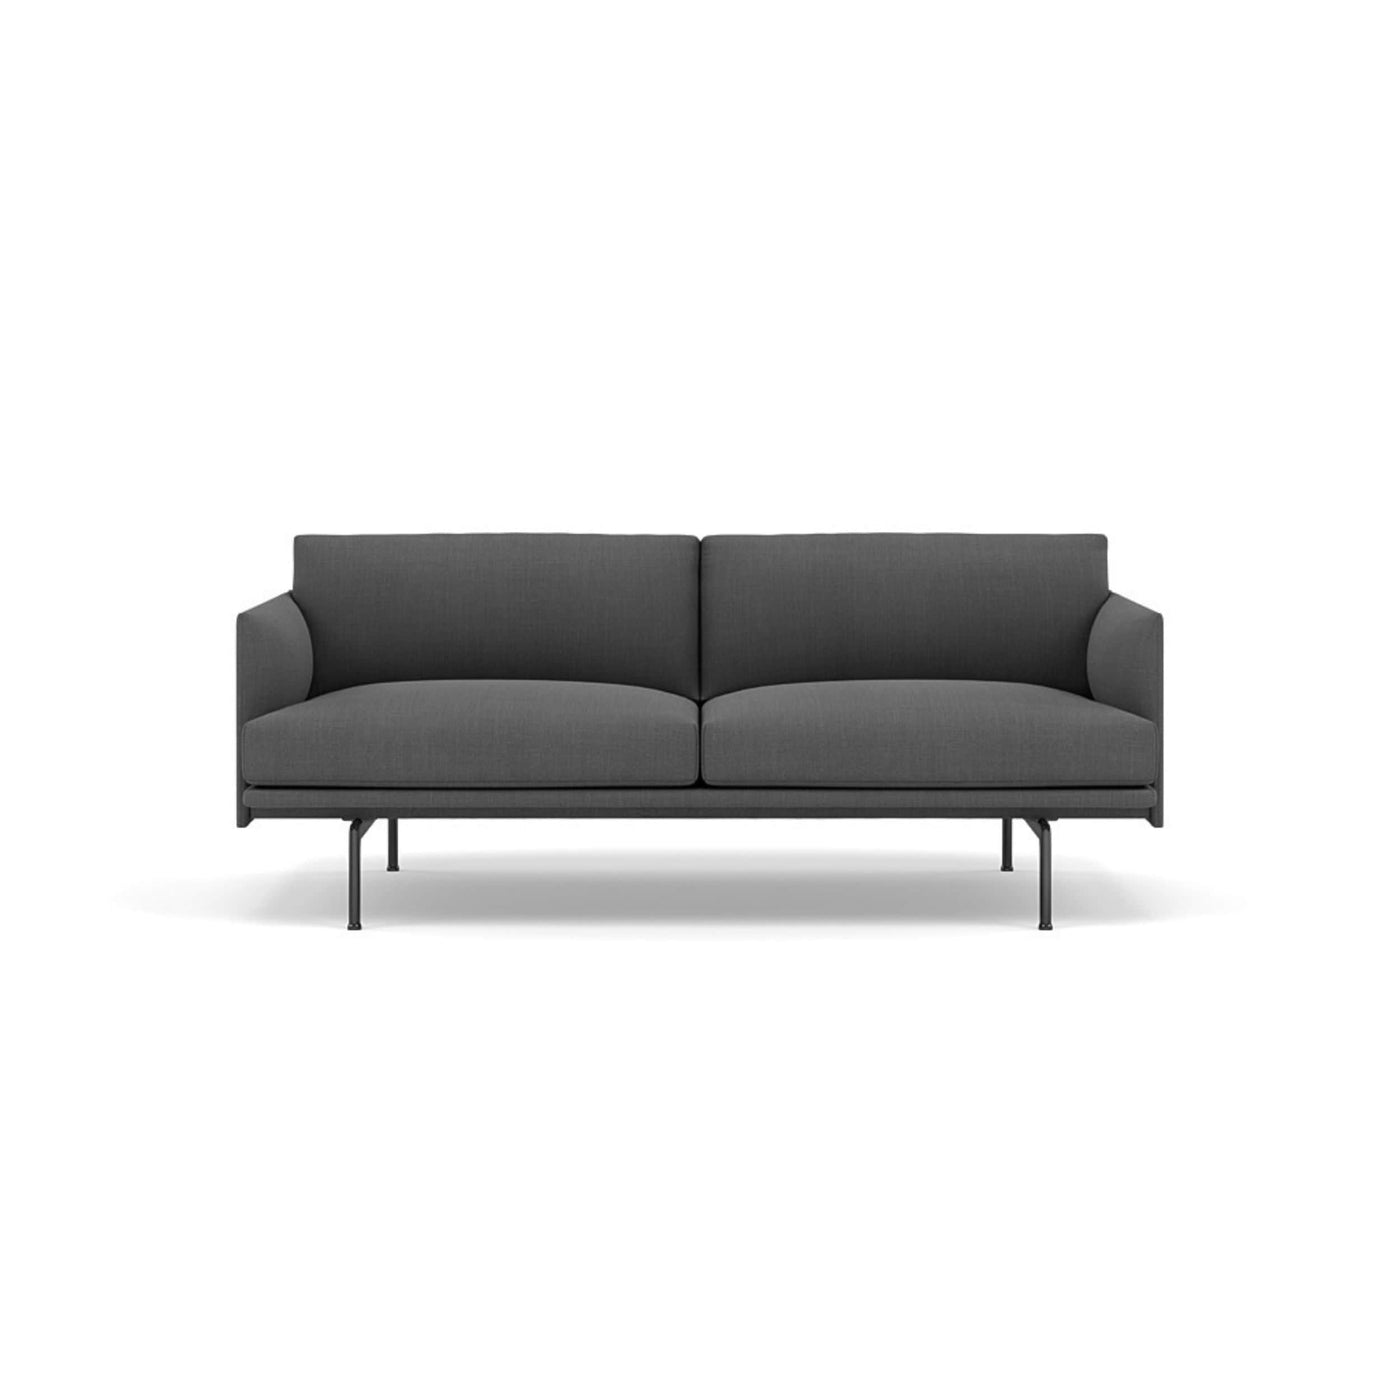 Muuto outline 2 seater sofa in remix 163 grey and black legs. Made to order from someday designs. #colour_remix-163